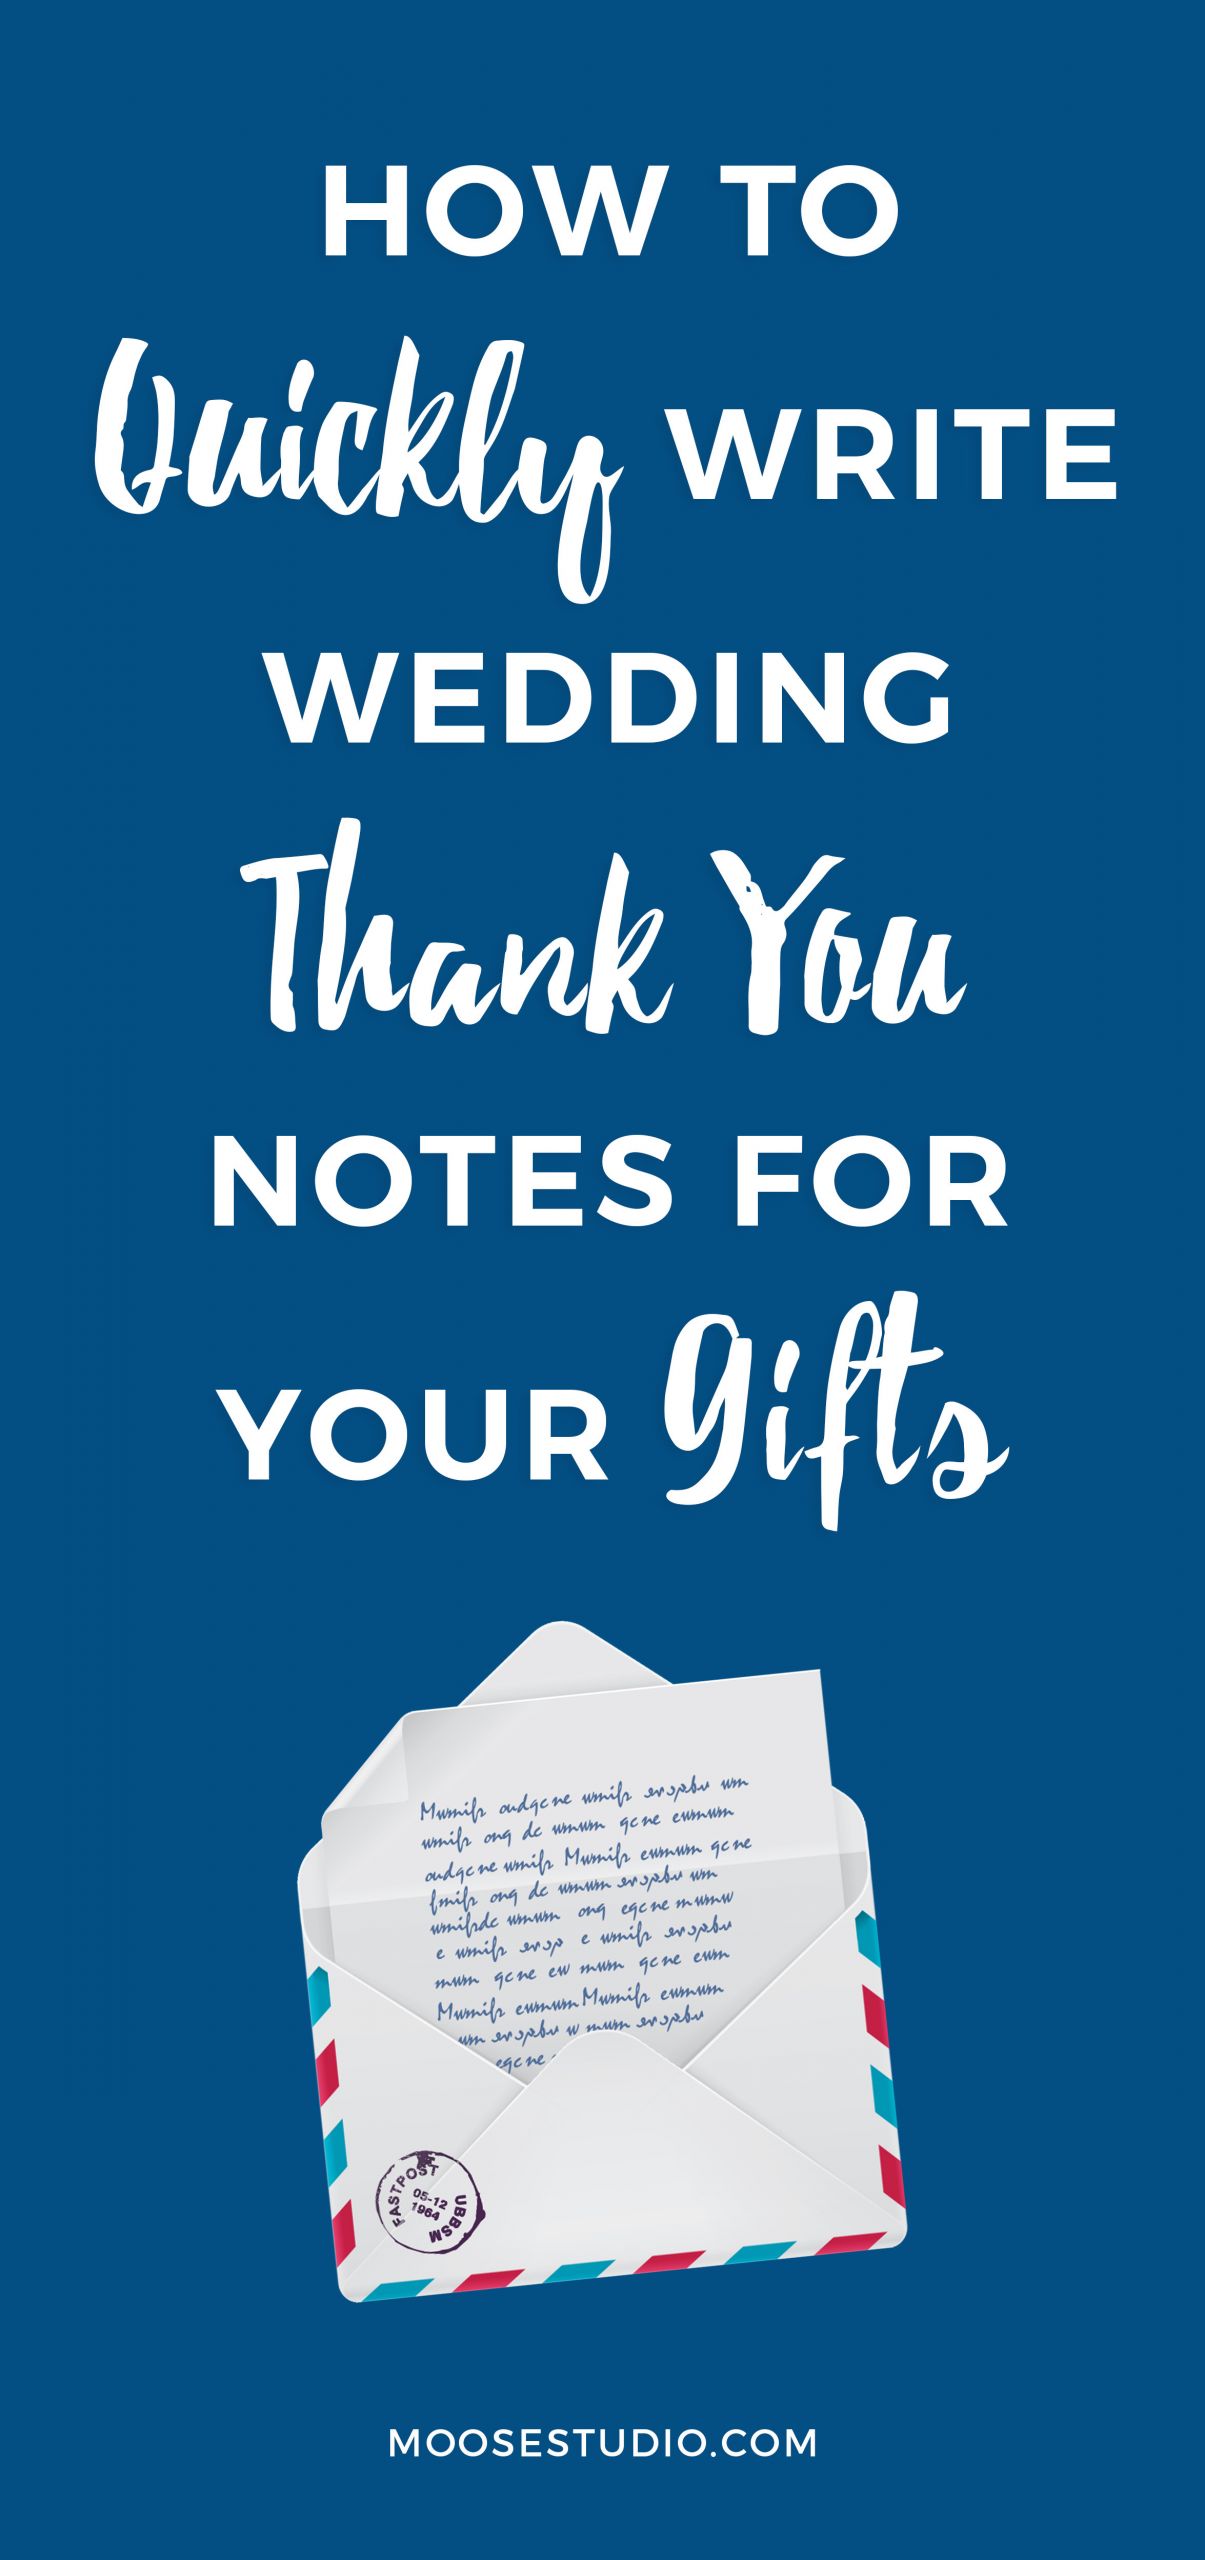 Message For Wedding Gift
 How To Quickly Conquer The Wording For Wedding Thank You Notes